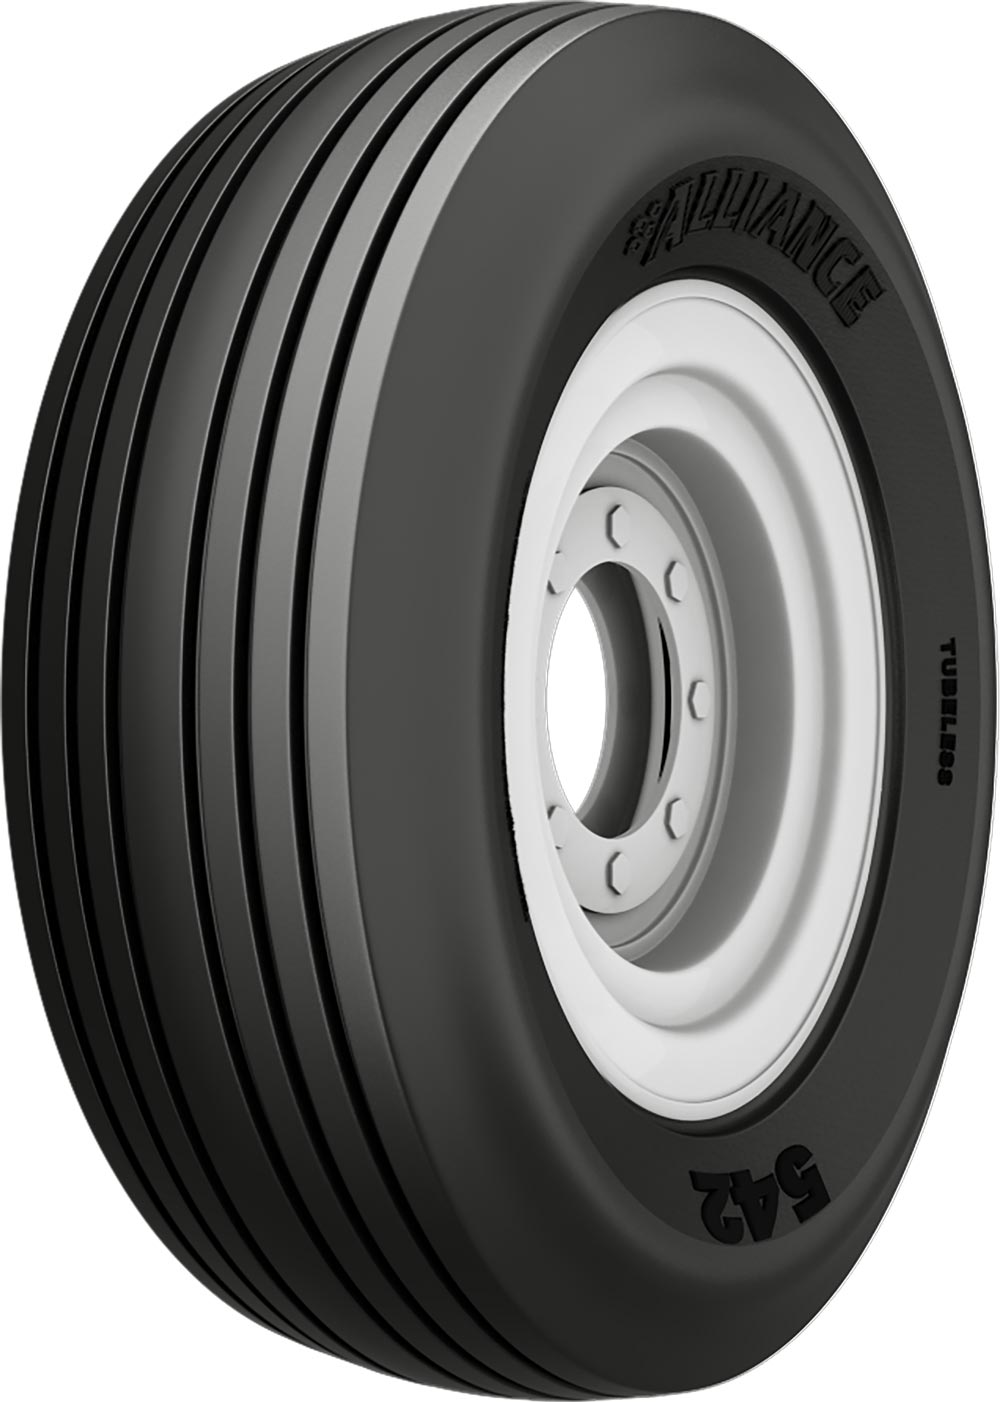 product_type-industrial_tires Alliance 542 12PR TL 11 R15 L